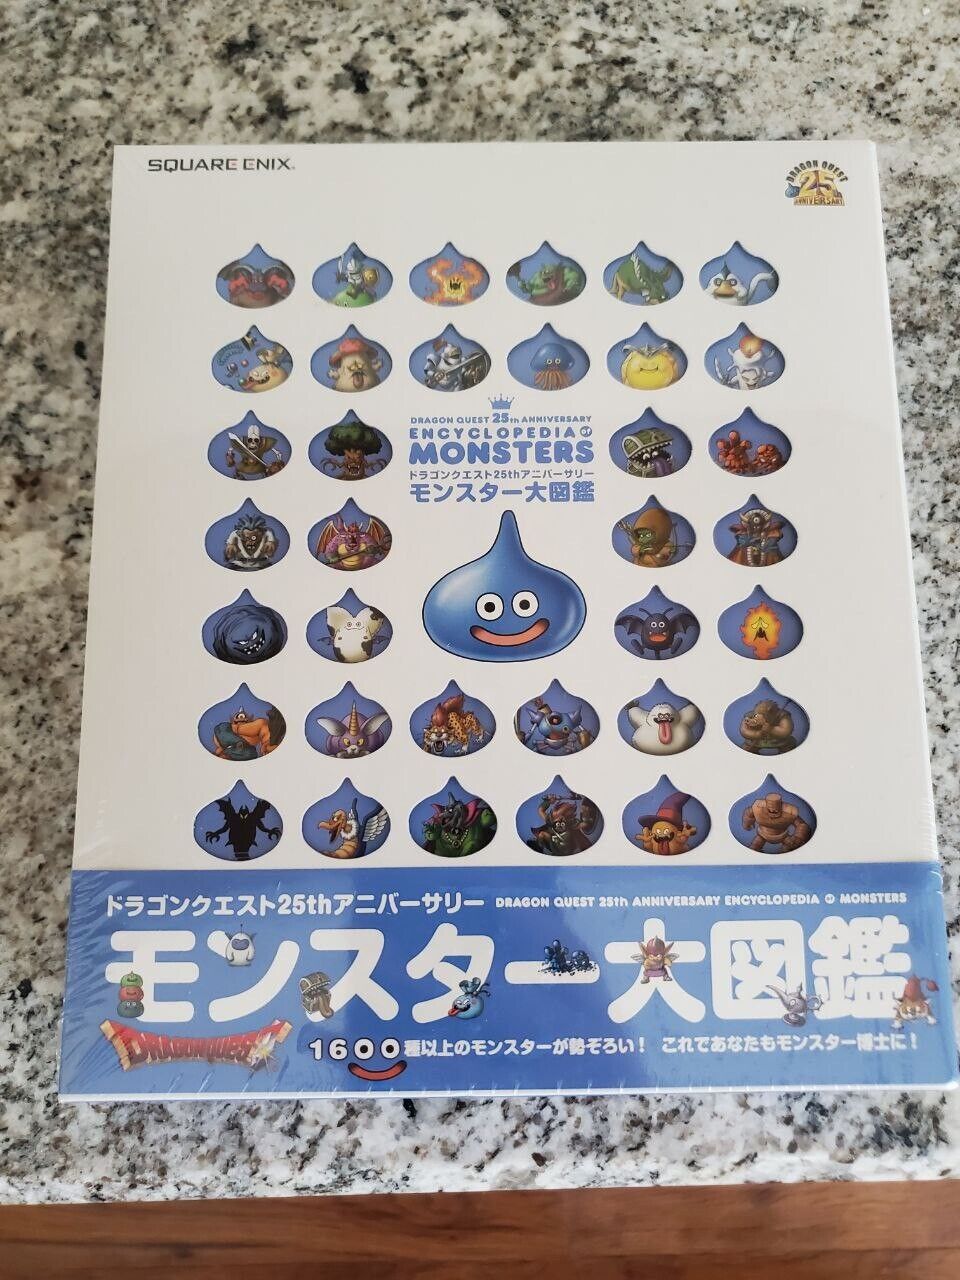 NEW SEALED Dragon Quest 25th Anniversary Encyclopedia of Monsters Japan Import